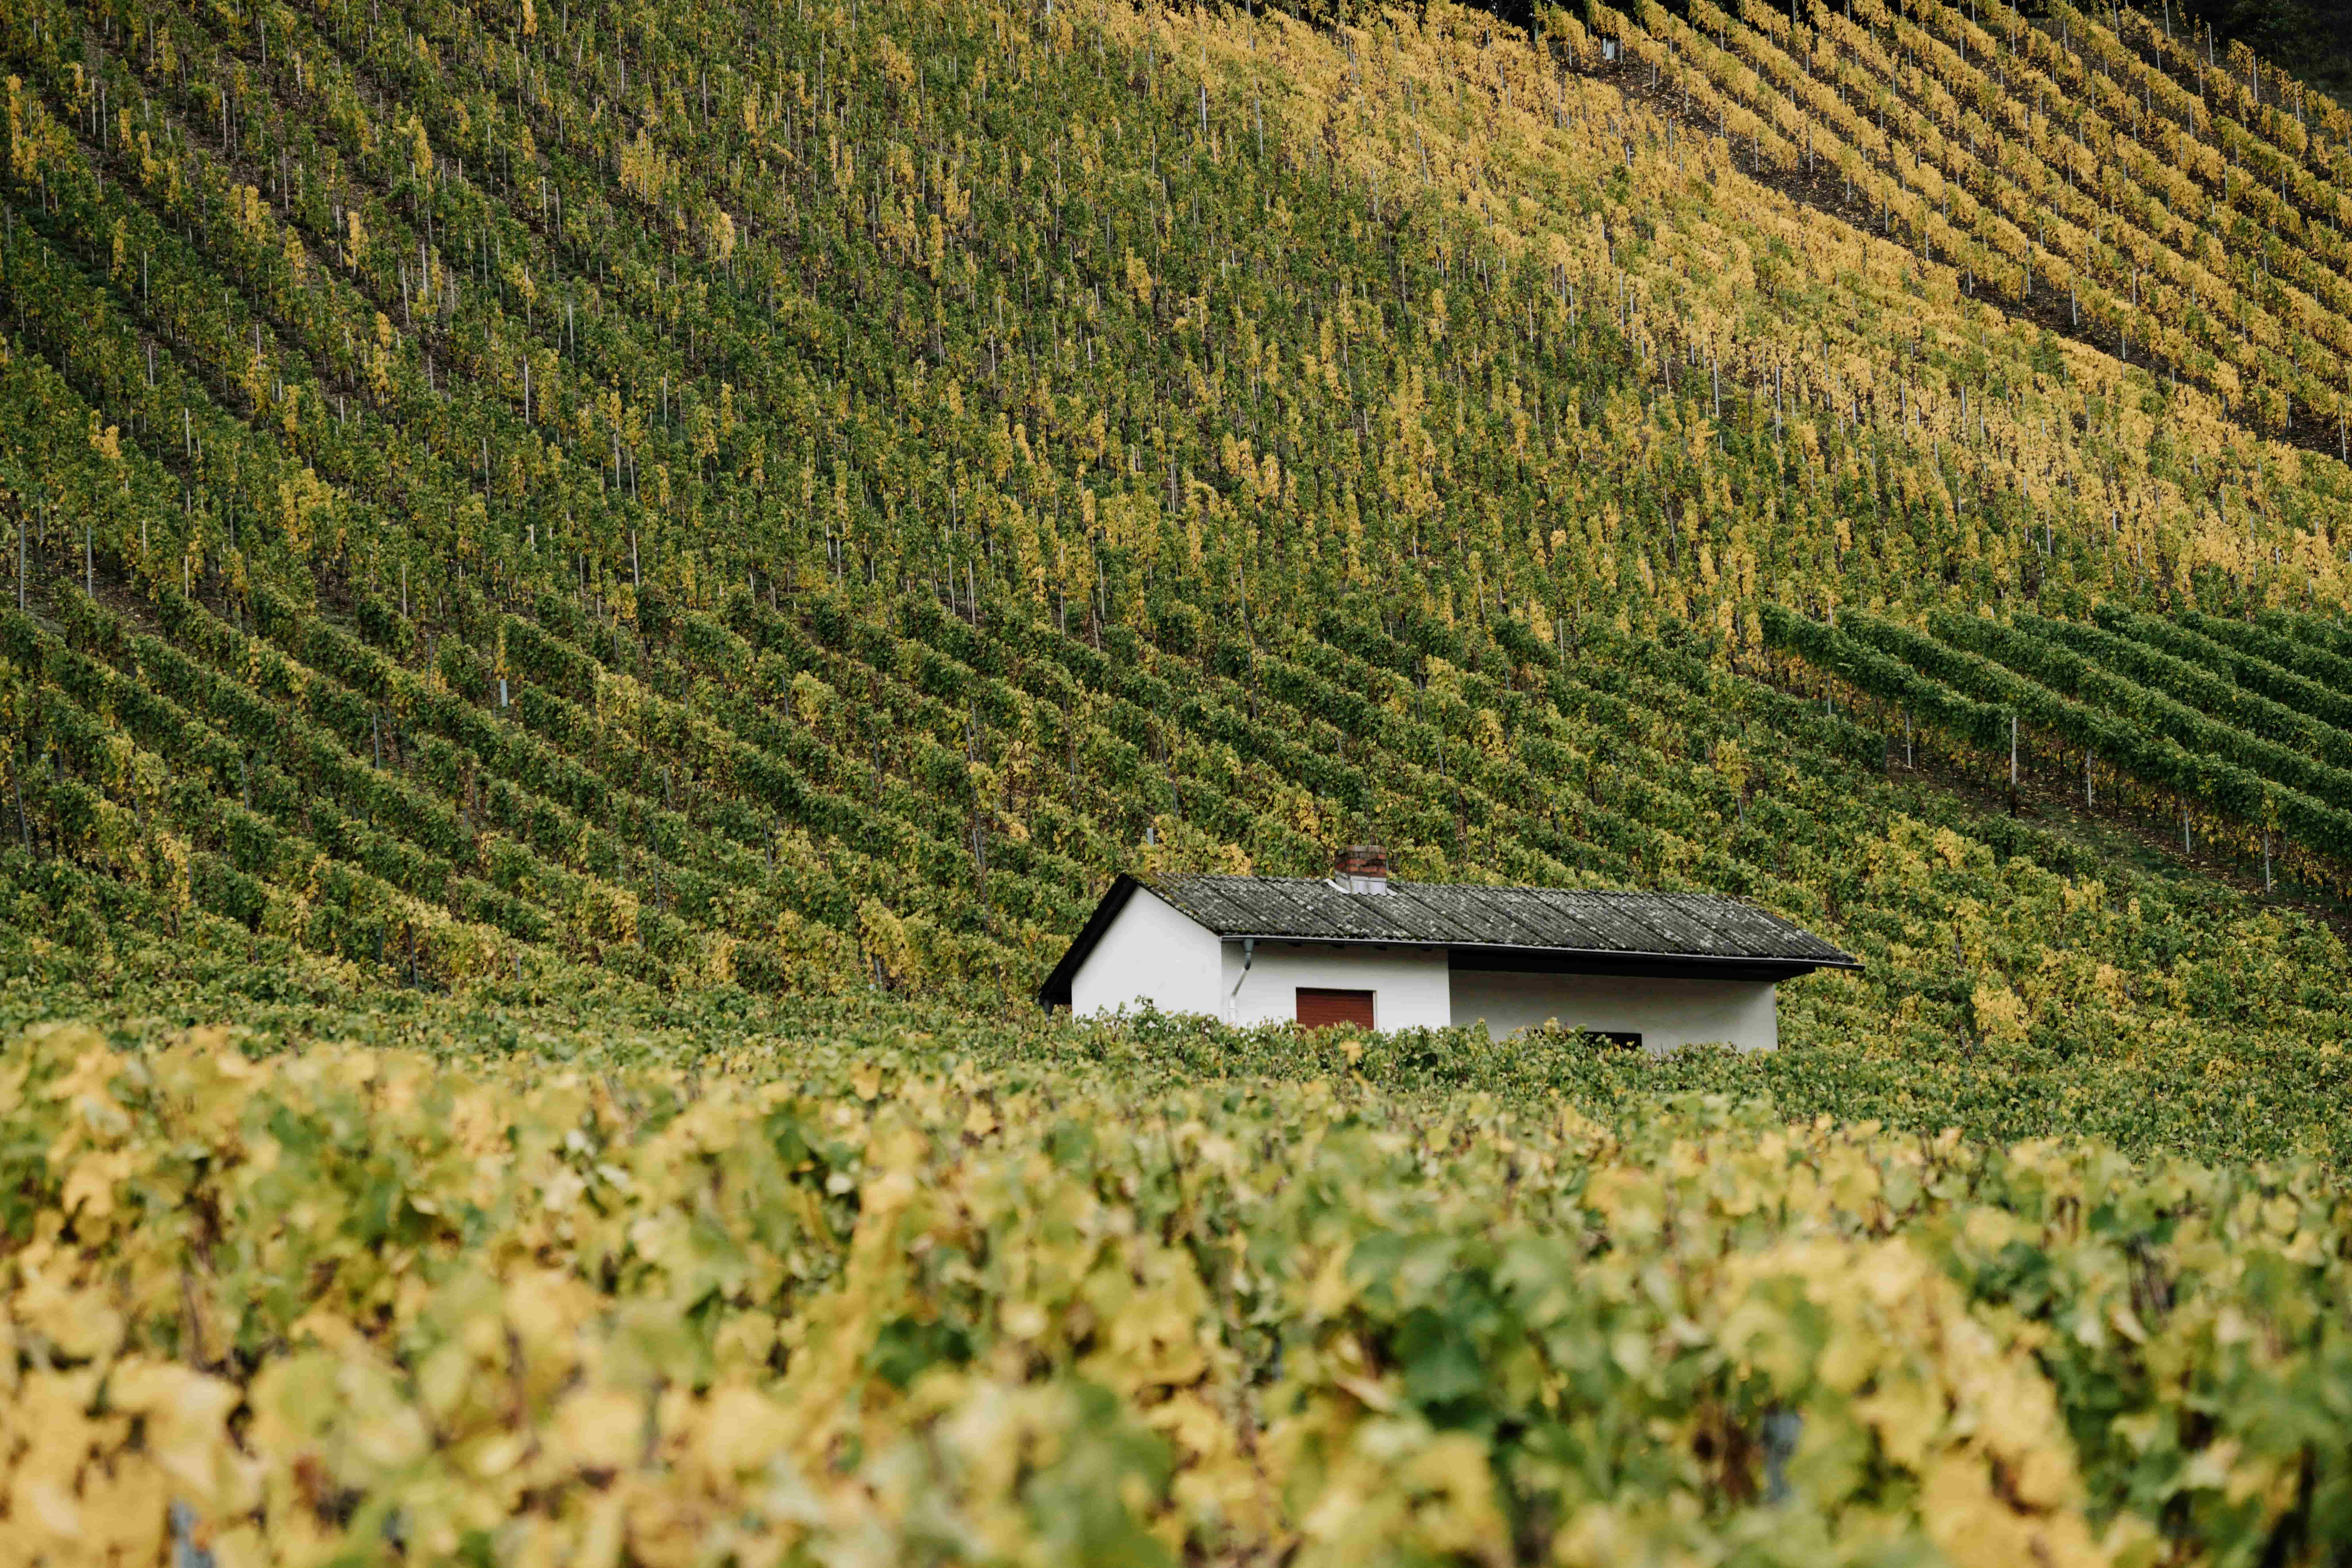 A small house in the middle of a vineyard